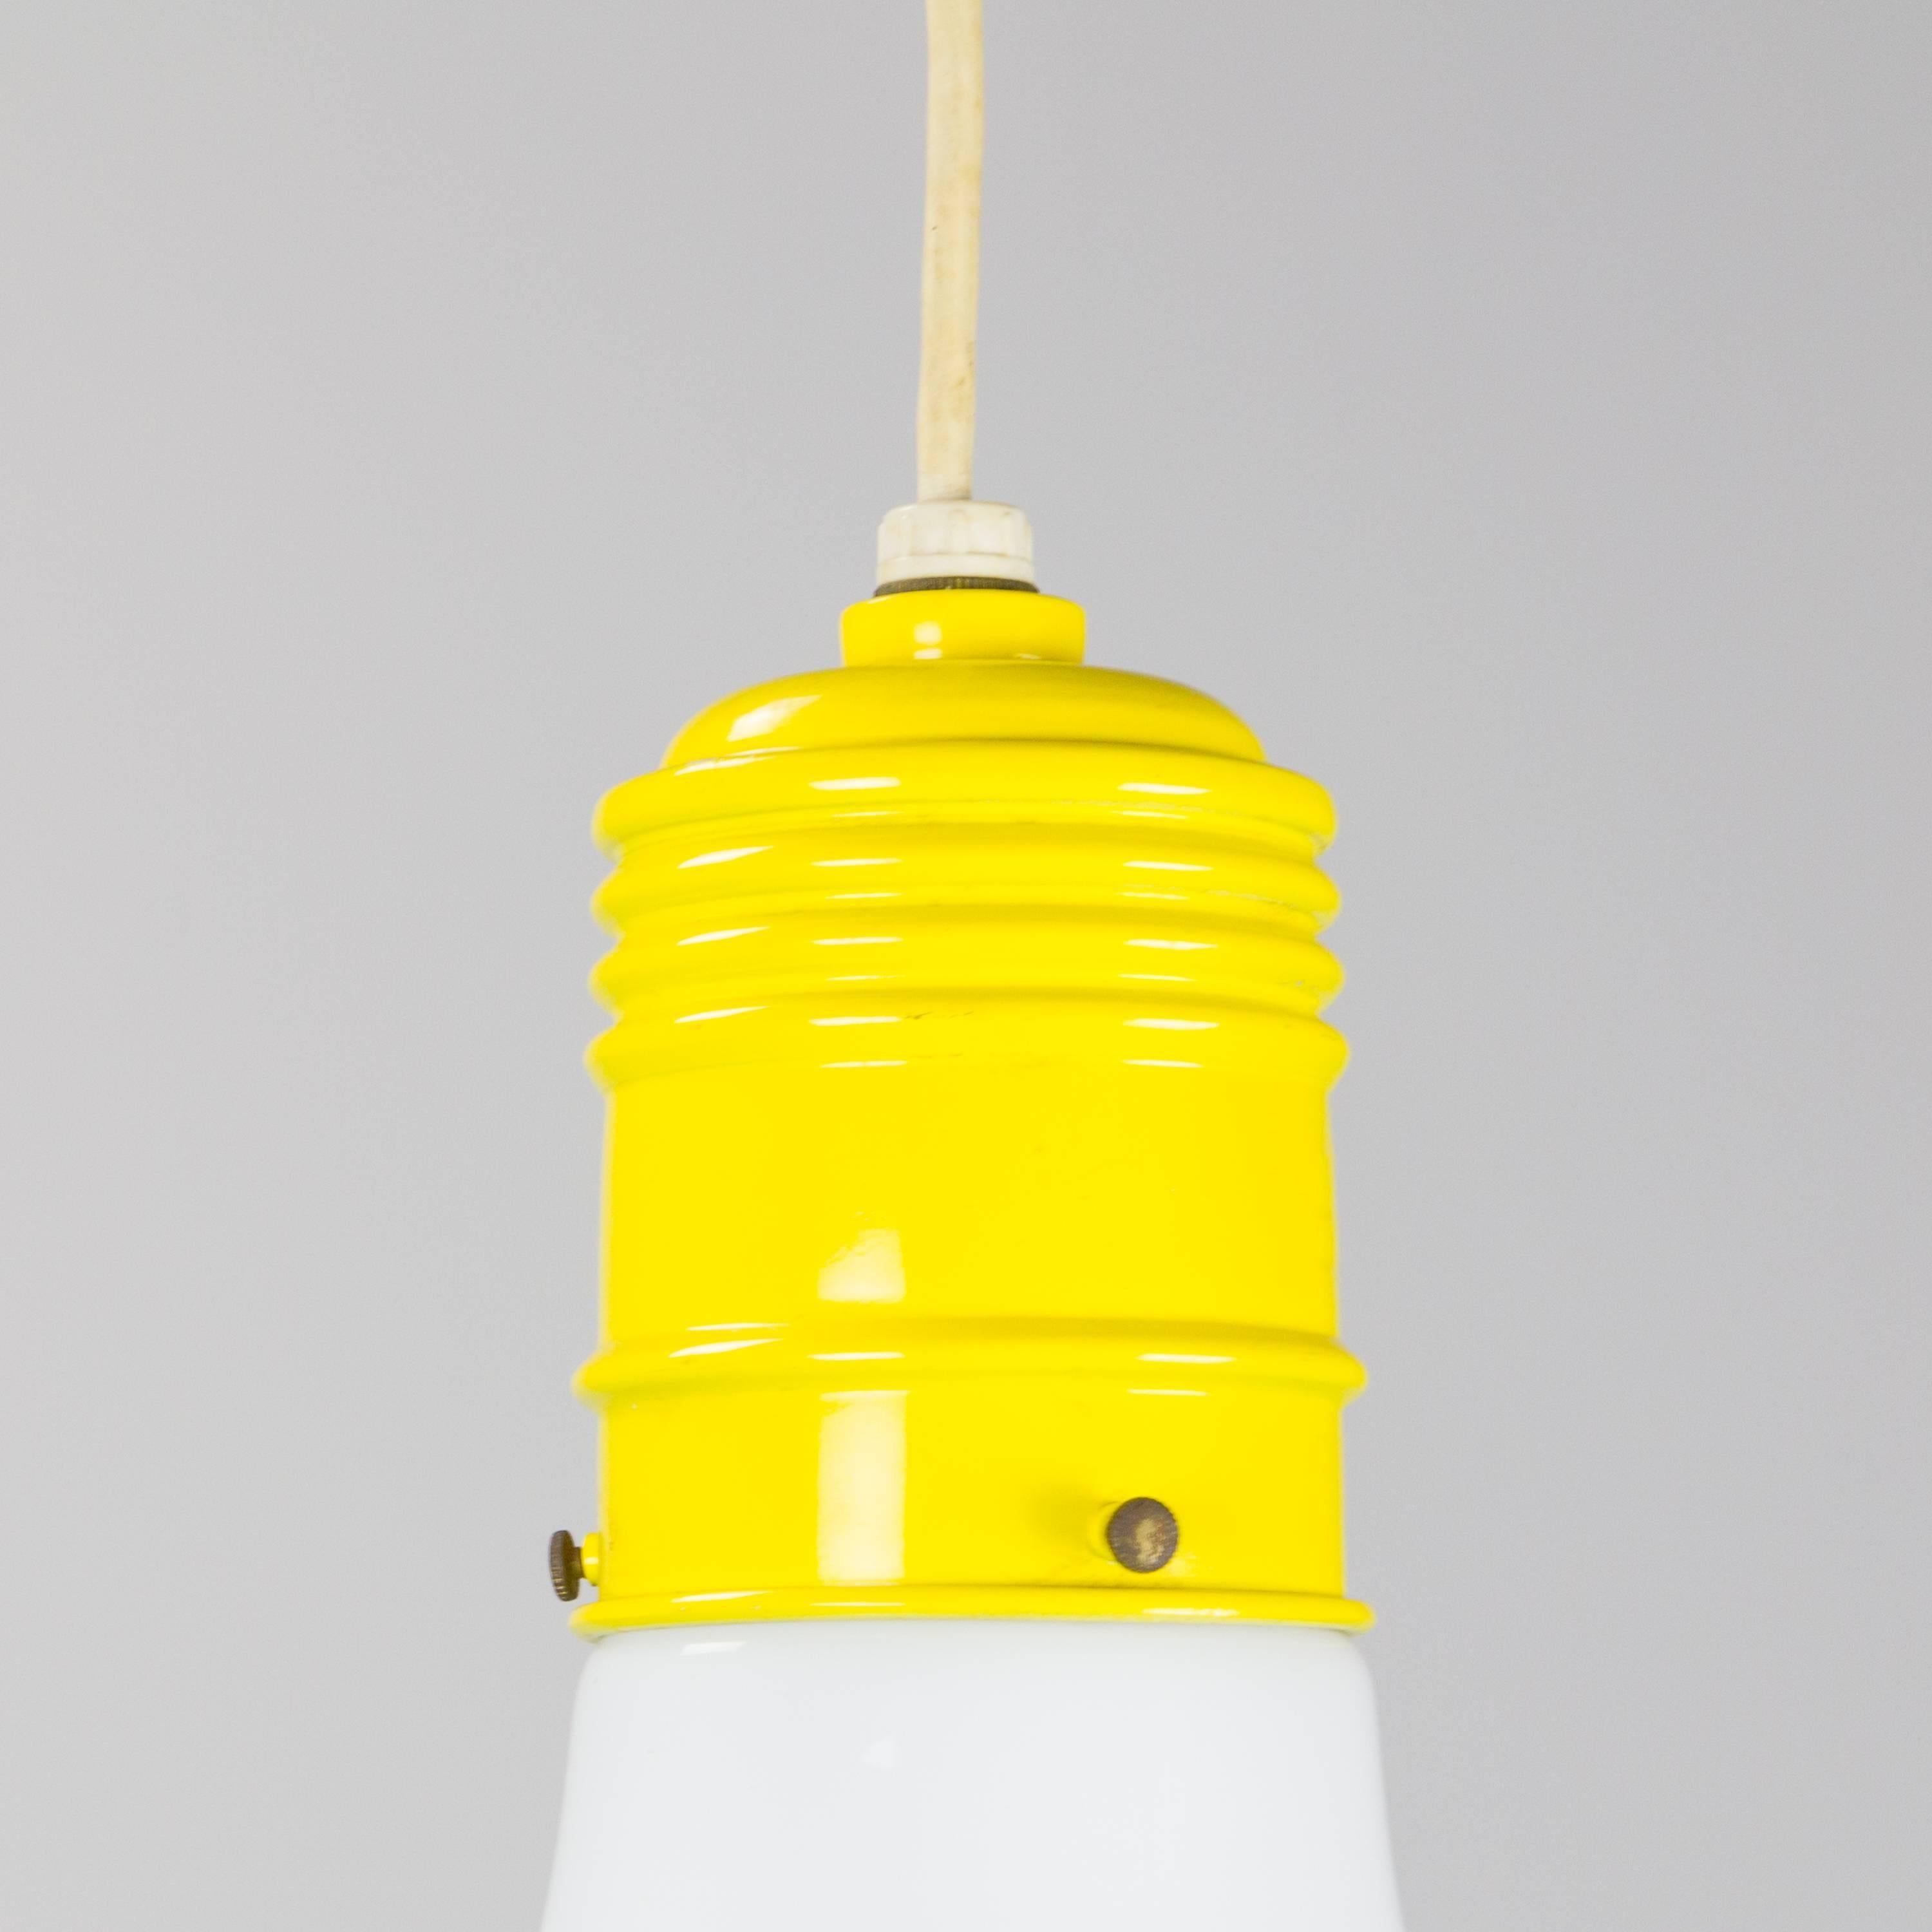 Oversized bulb pendant lamp by Ingo Maurer for Design M with opal glass bulb-form shade and yellow enameled metal socket. The lamp hangs from its cord and adjusts with two painted yellow wood cable-keeps.